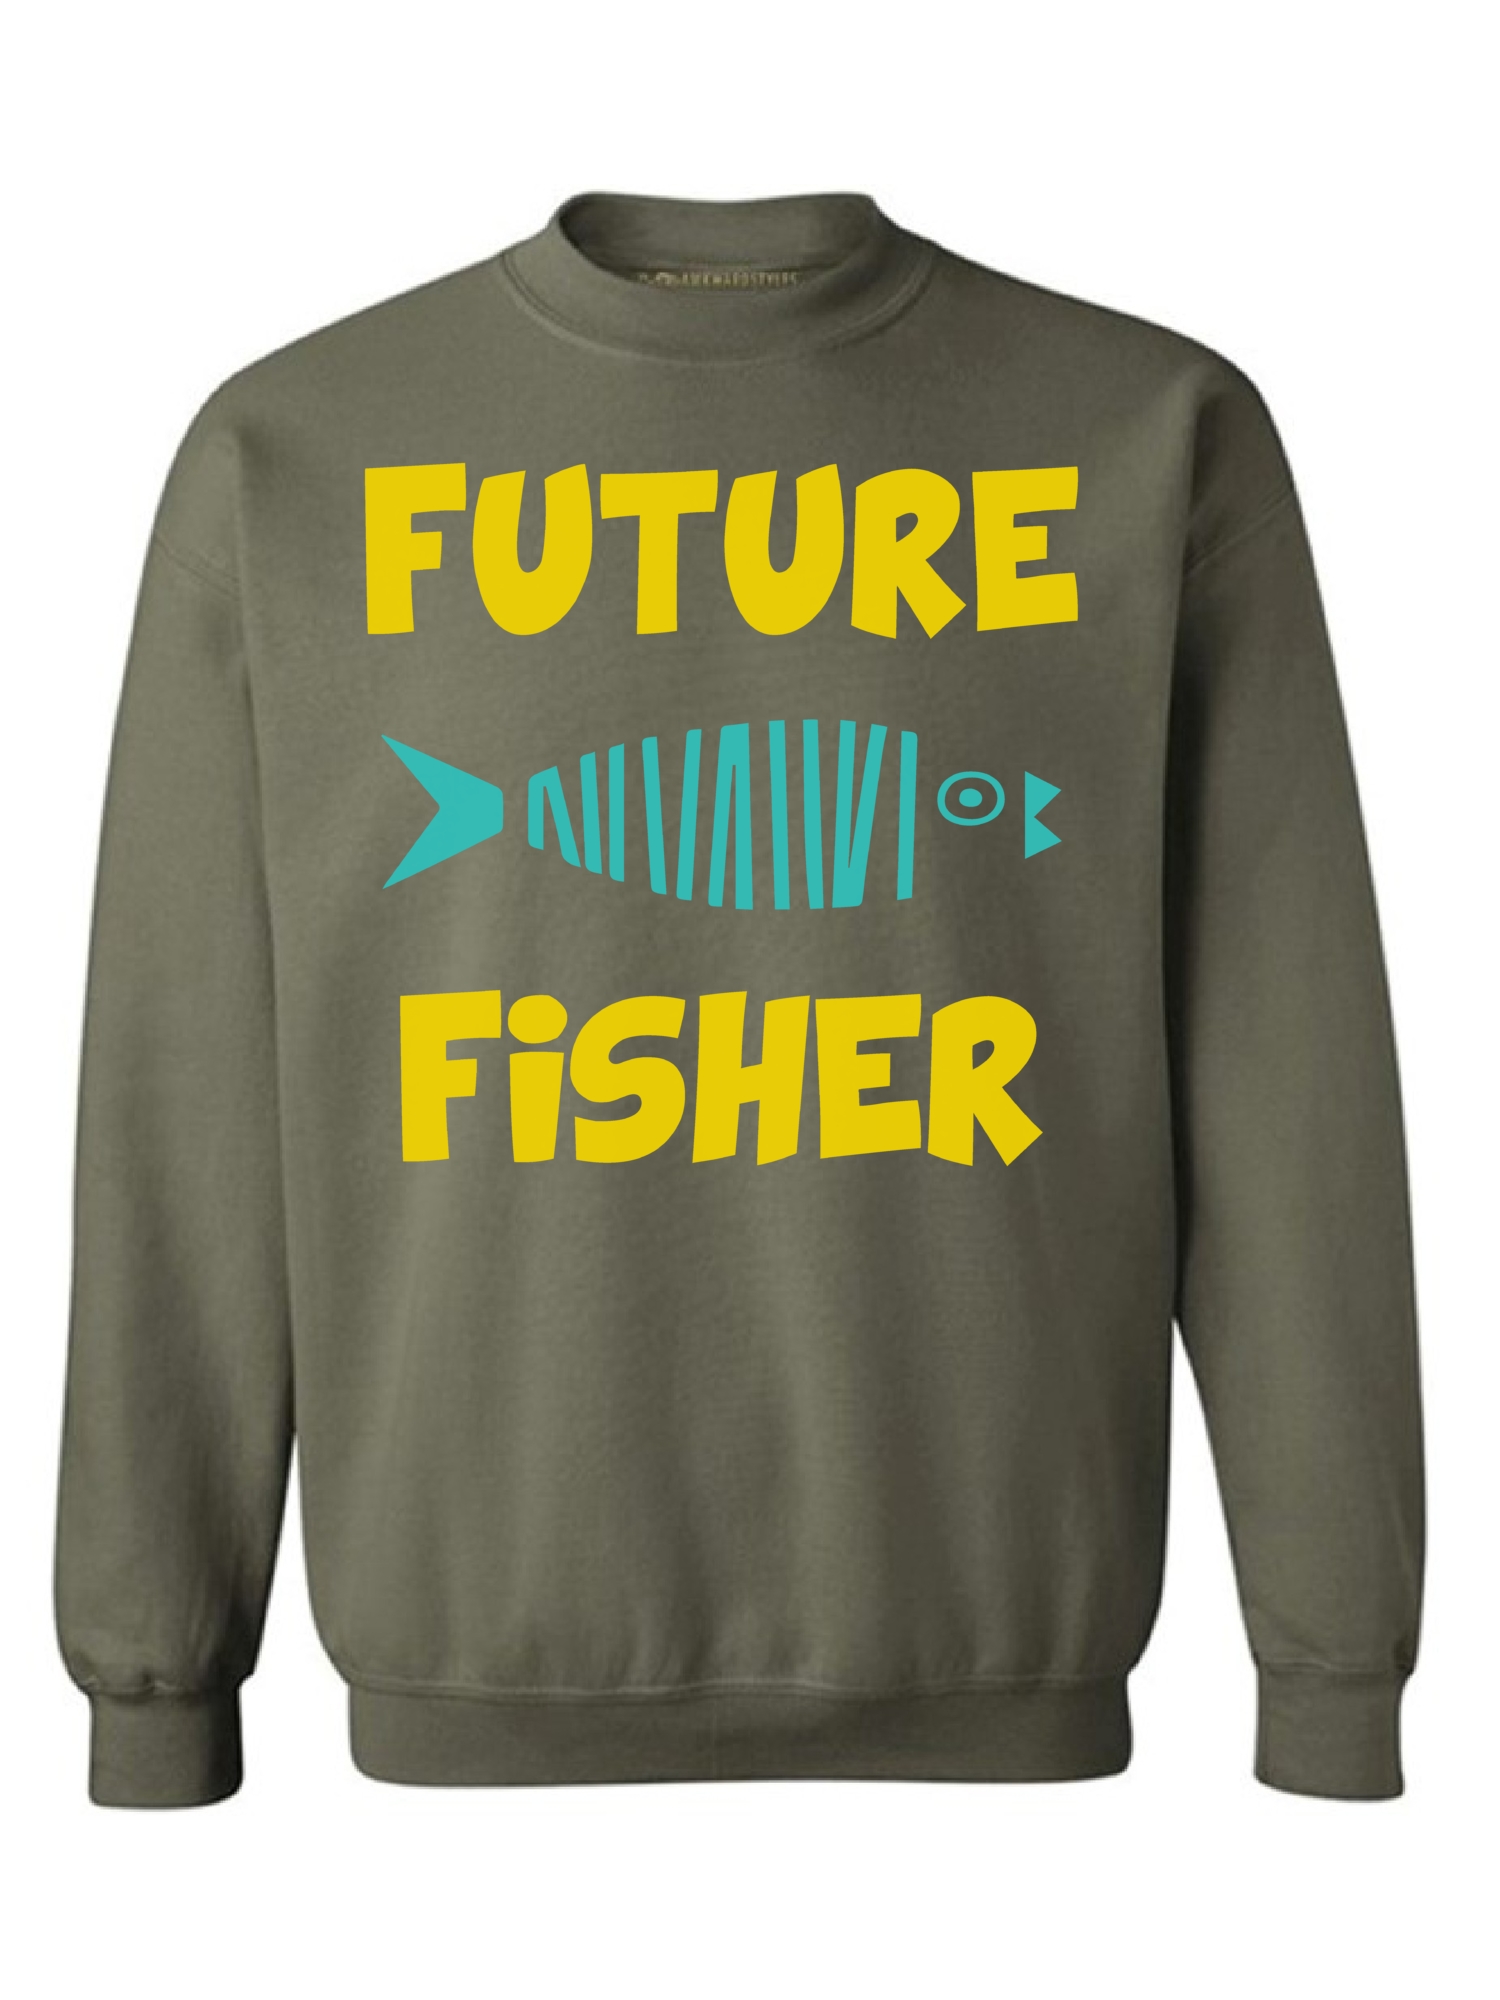 Awkward Styles Crewneck for Fisher Future Fisher Unisex Crewneck Fisher Sweater for Men Future Fisher Crewneck for Women Fishing Clothes Future Fisher Crewneck Fishers Gifts Sweater for Fisher - image 1 of 5